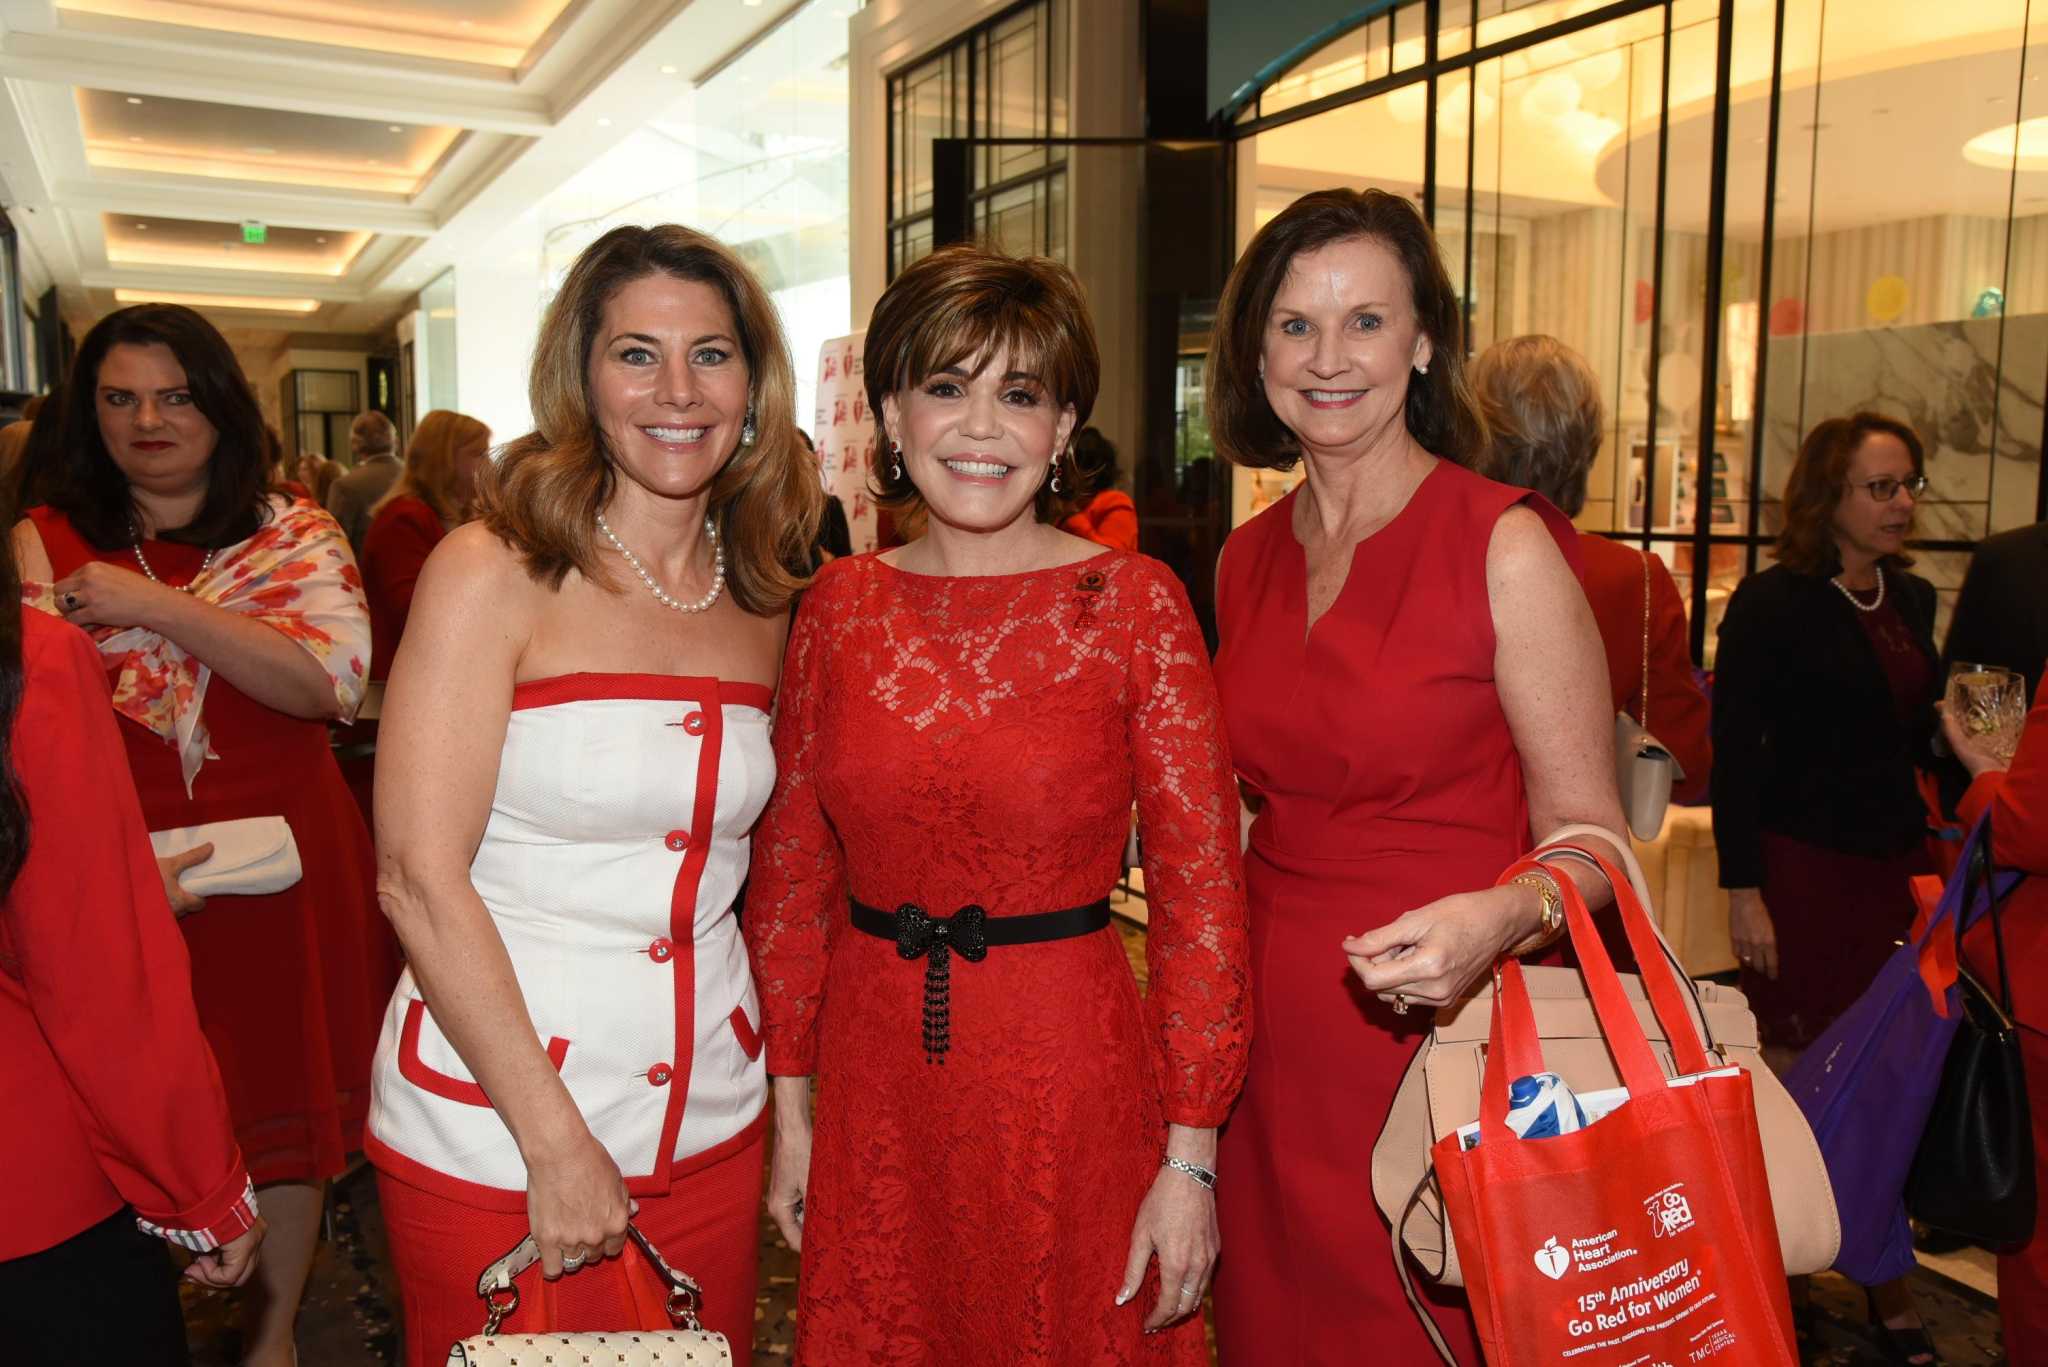 Go Red for Women Luncheons